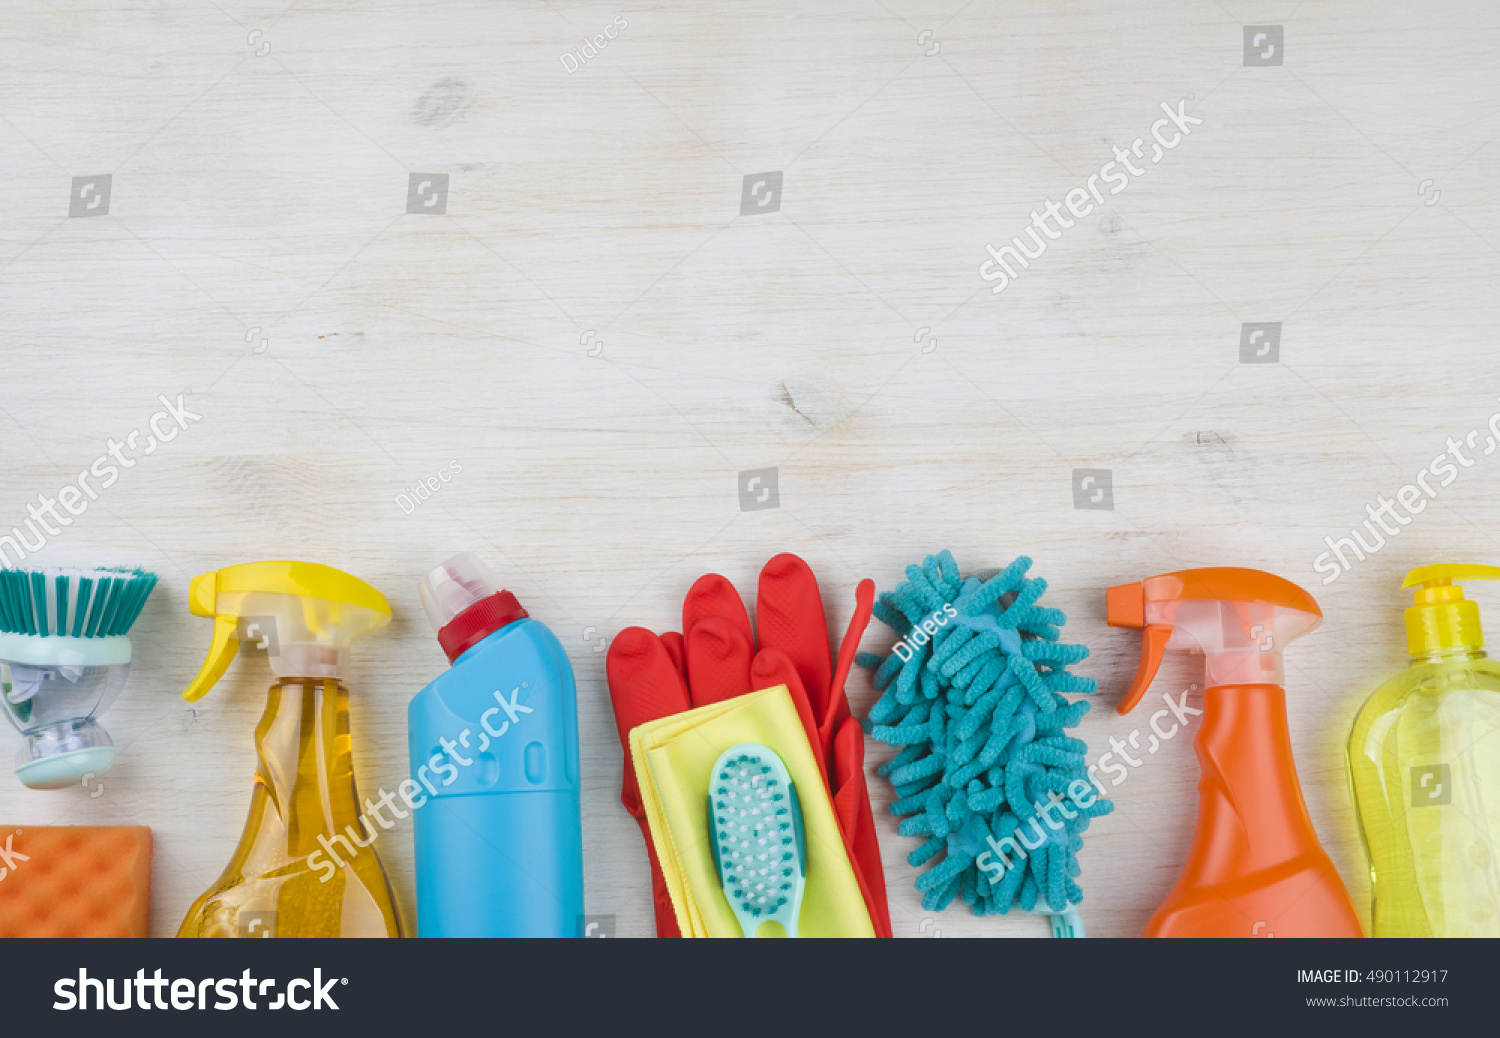 Household cleaning products on wooden background with copyspace at top #490112917